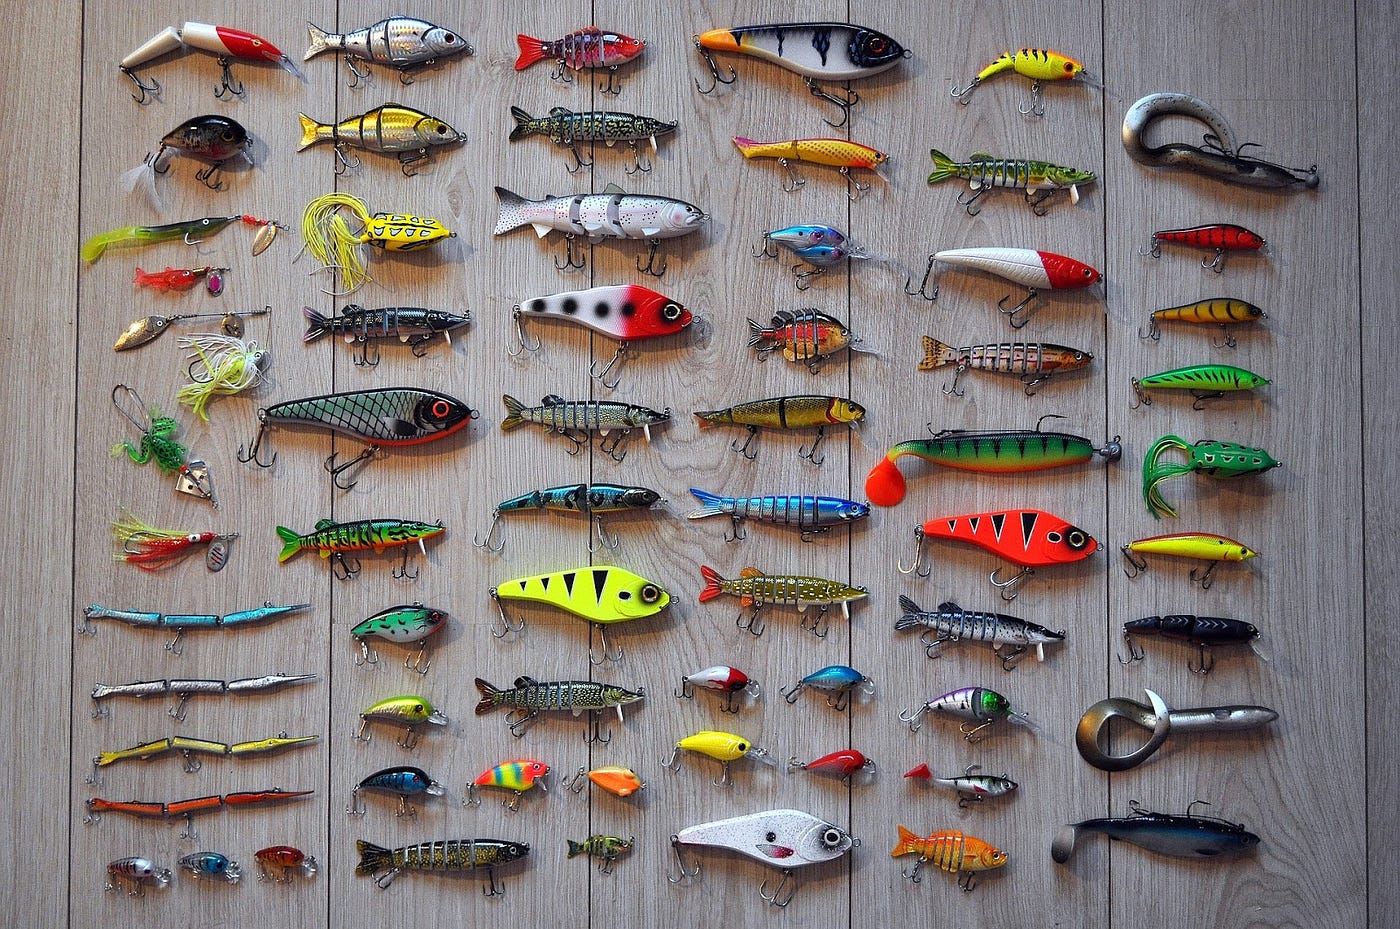 Do you need a lot of different lures for pike fishing?